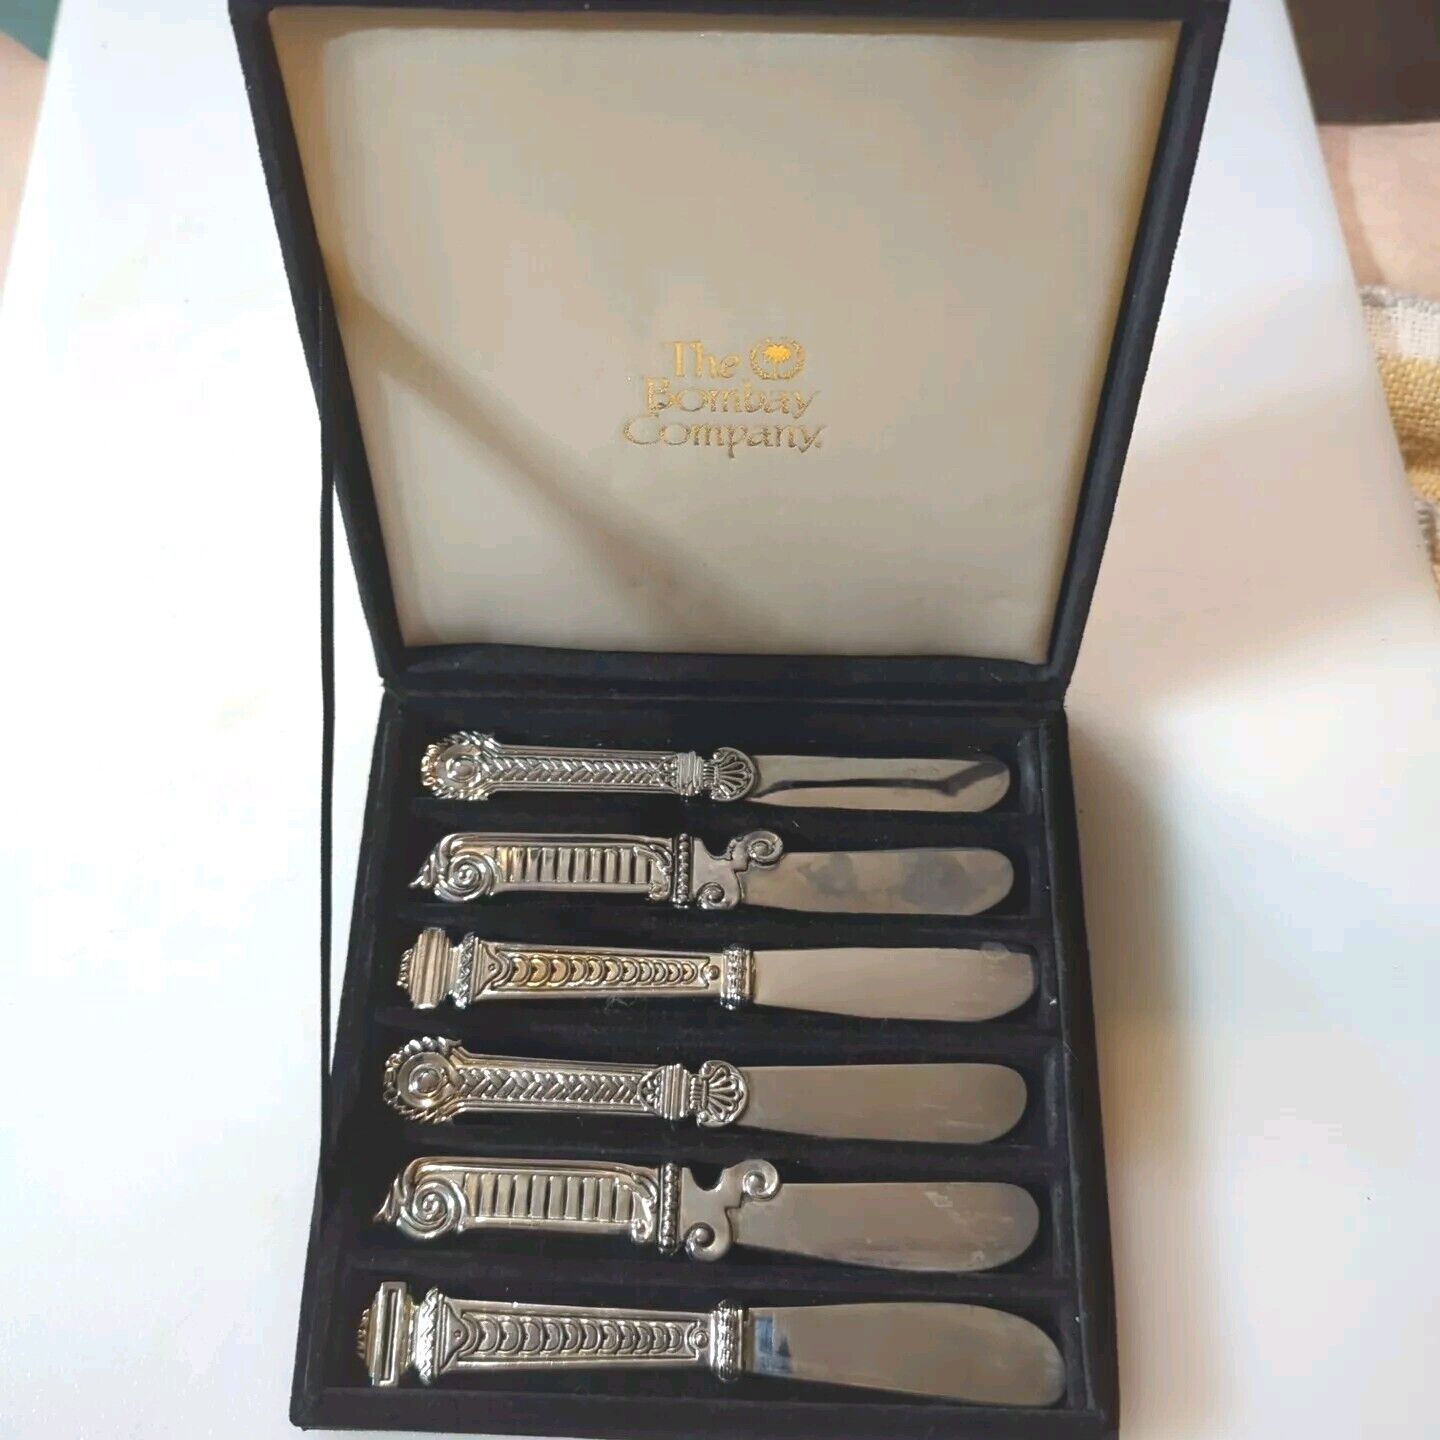 Bombay Company Godinger Silver Plated Pate Knives Set Of 6 Assorted